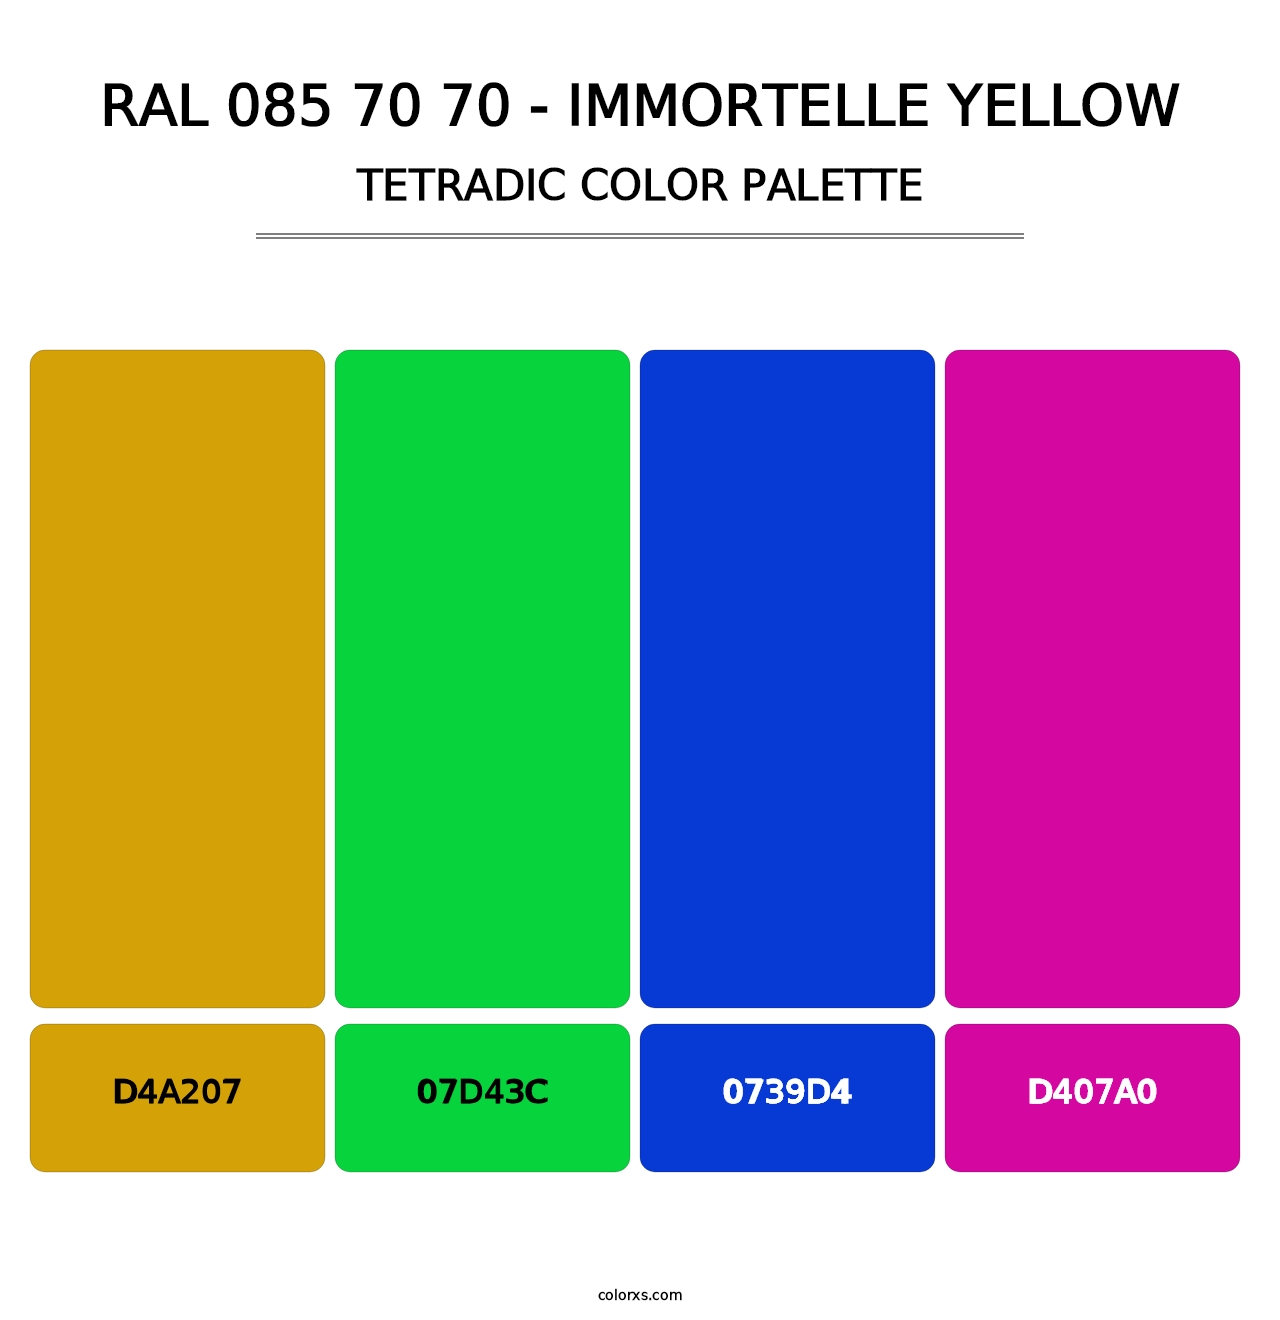 RAL 085 70 70 - Immortelle Yellow - Tetradic Color Palette